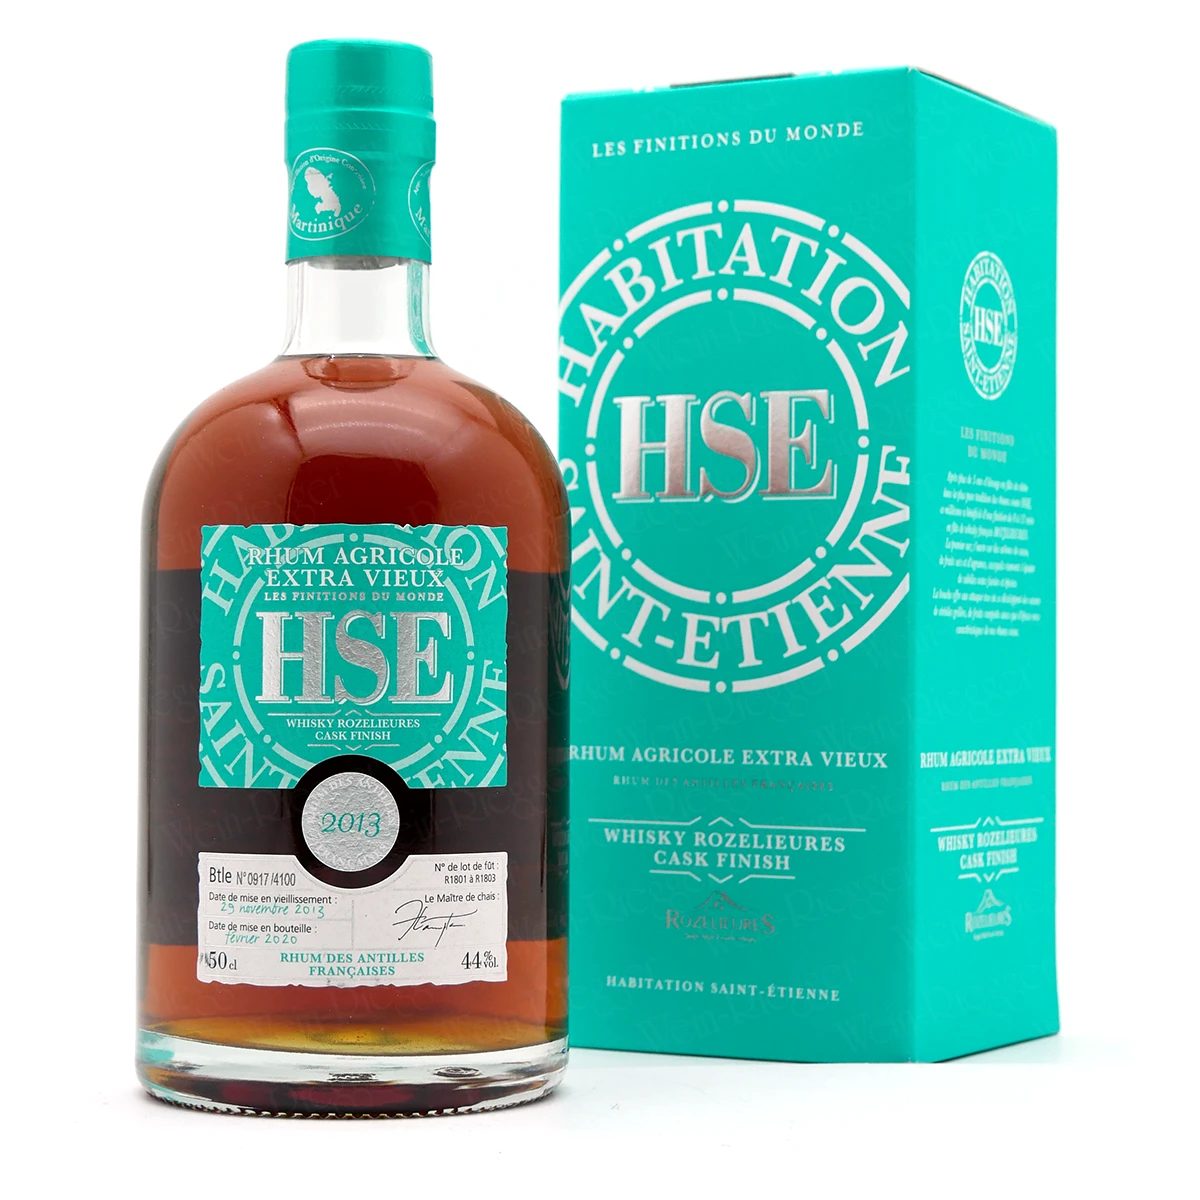 HSE Whisky Rozelieures Cask Finish